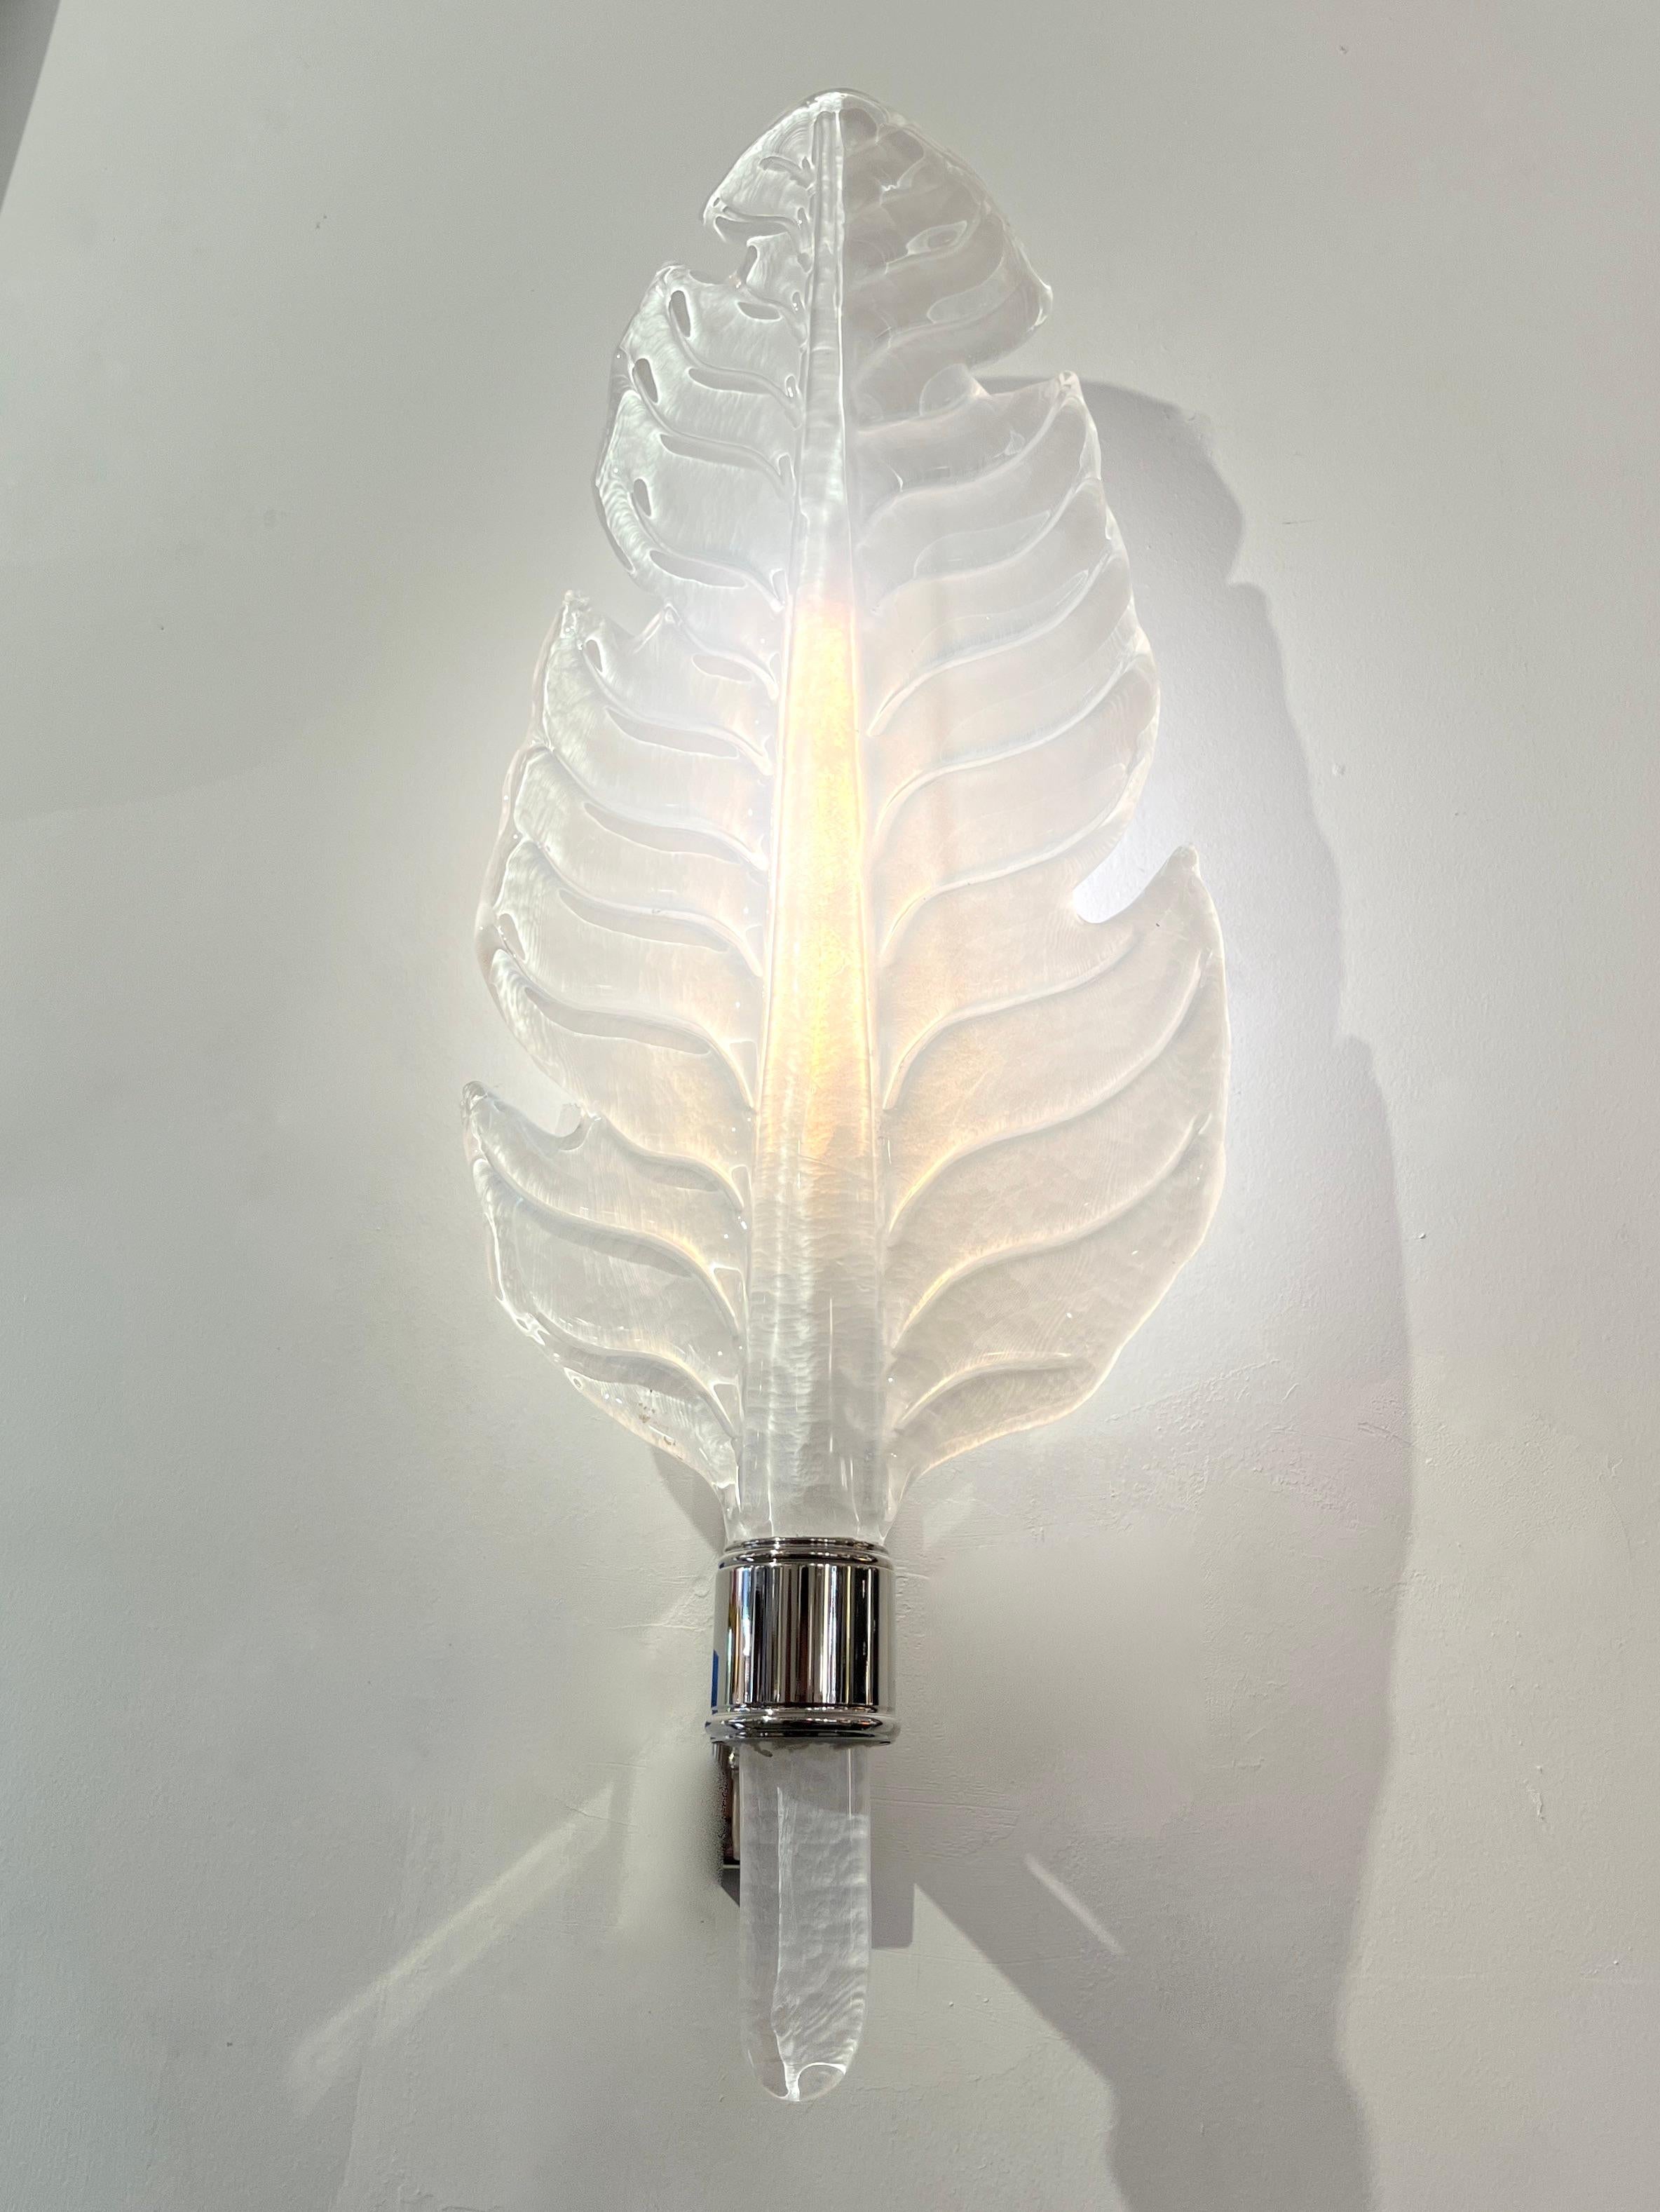 Very elegant pair of bespoke wall lights in blown Murano glass in the style of Barovier, with an Art Deco design feather leaf organic modern shape. Entirely handcrafted in Italy, the high-quality white Murano glass has a pearl luminosity iridescence